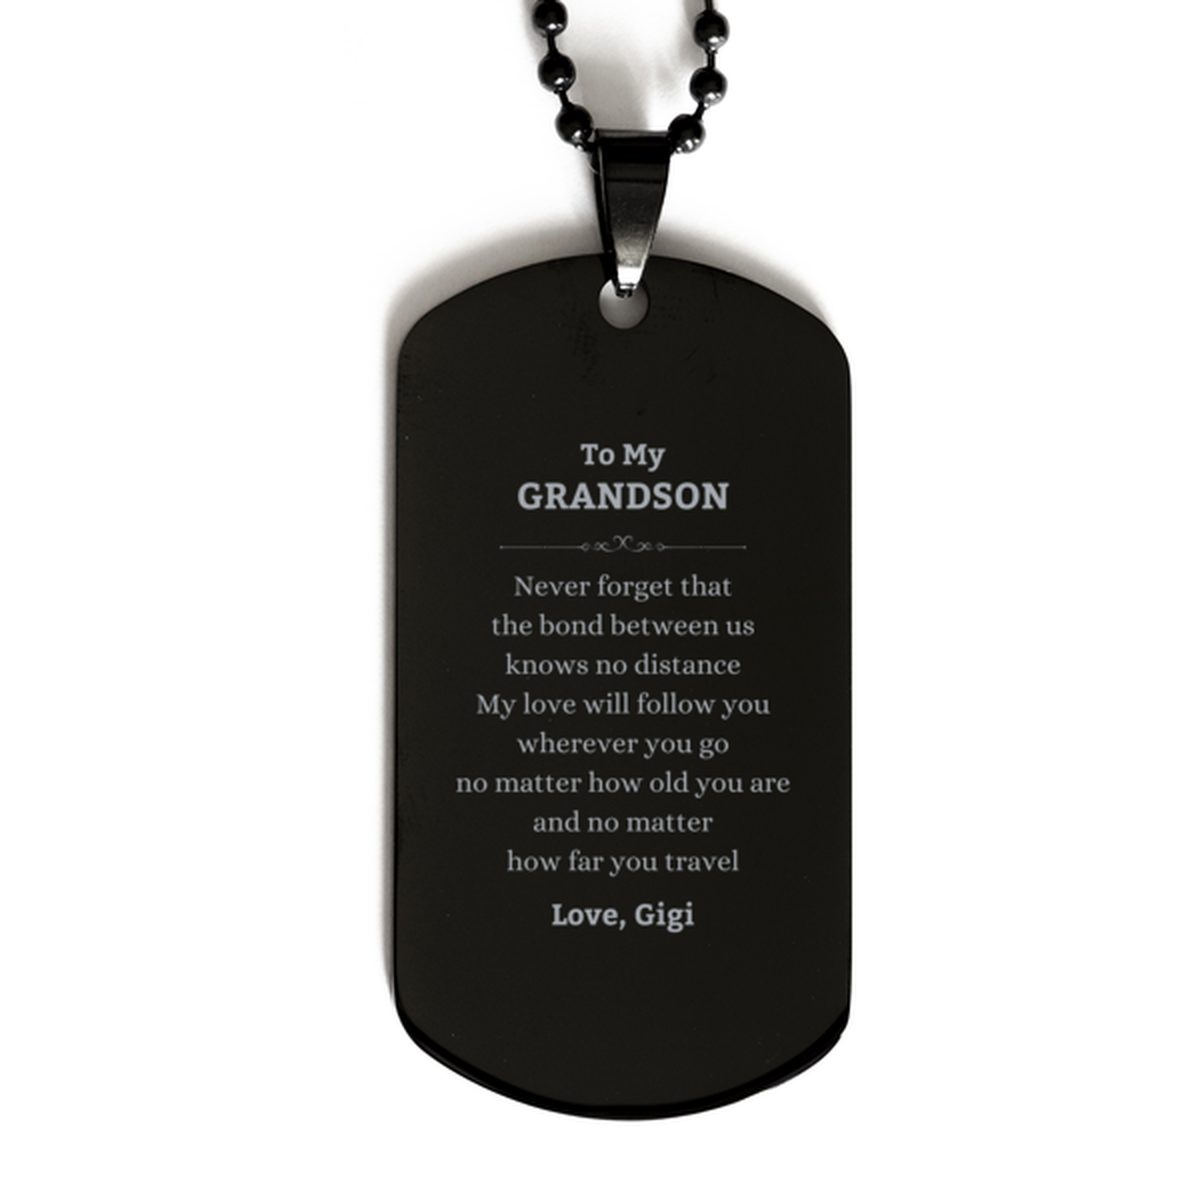 Grandson Birthday Gifts from Gigi, Adjustable Black Dog Tag for Grandson Christmas Graduation Unique Gifts Grandson Never forget that the bond between us knows no distance. Love, Gigi